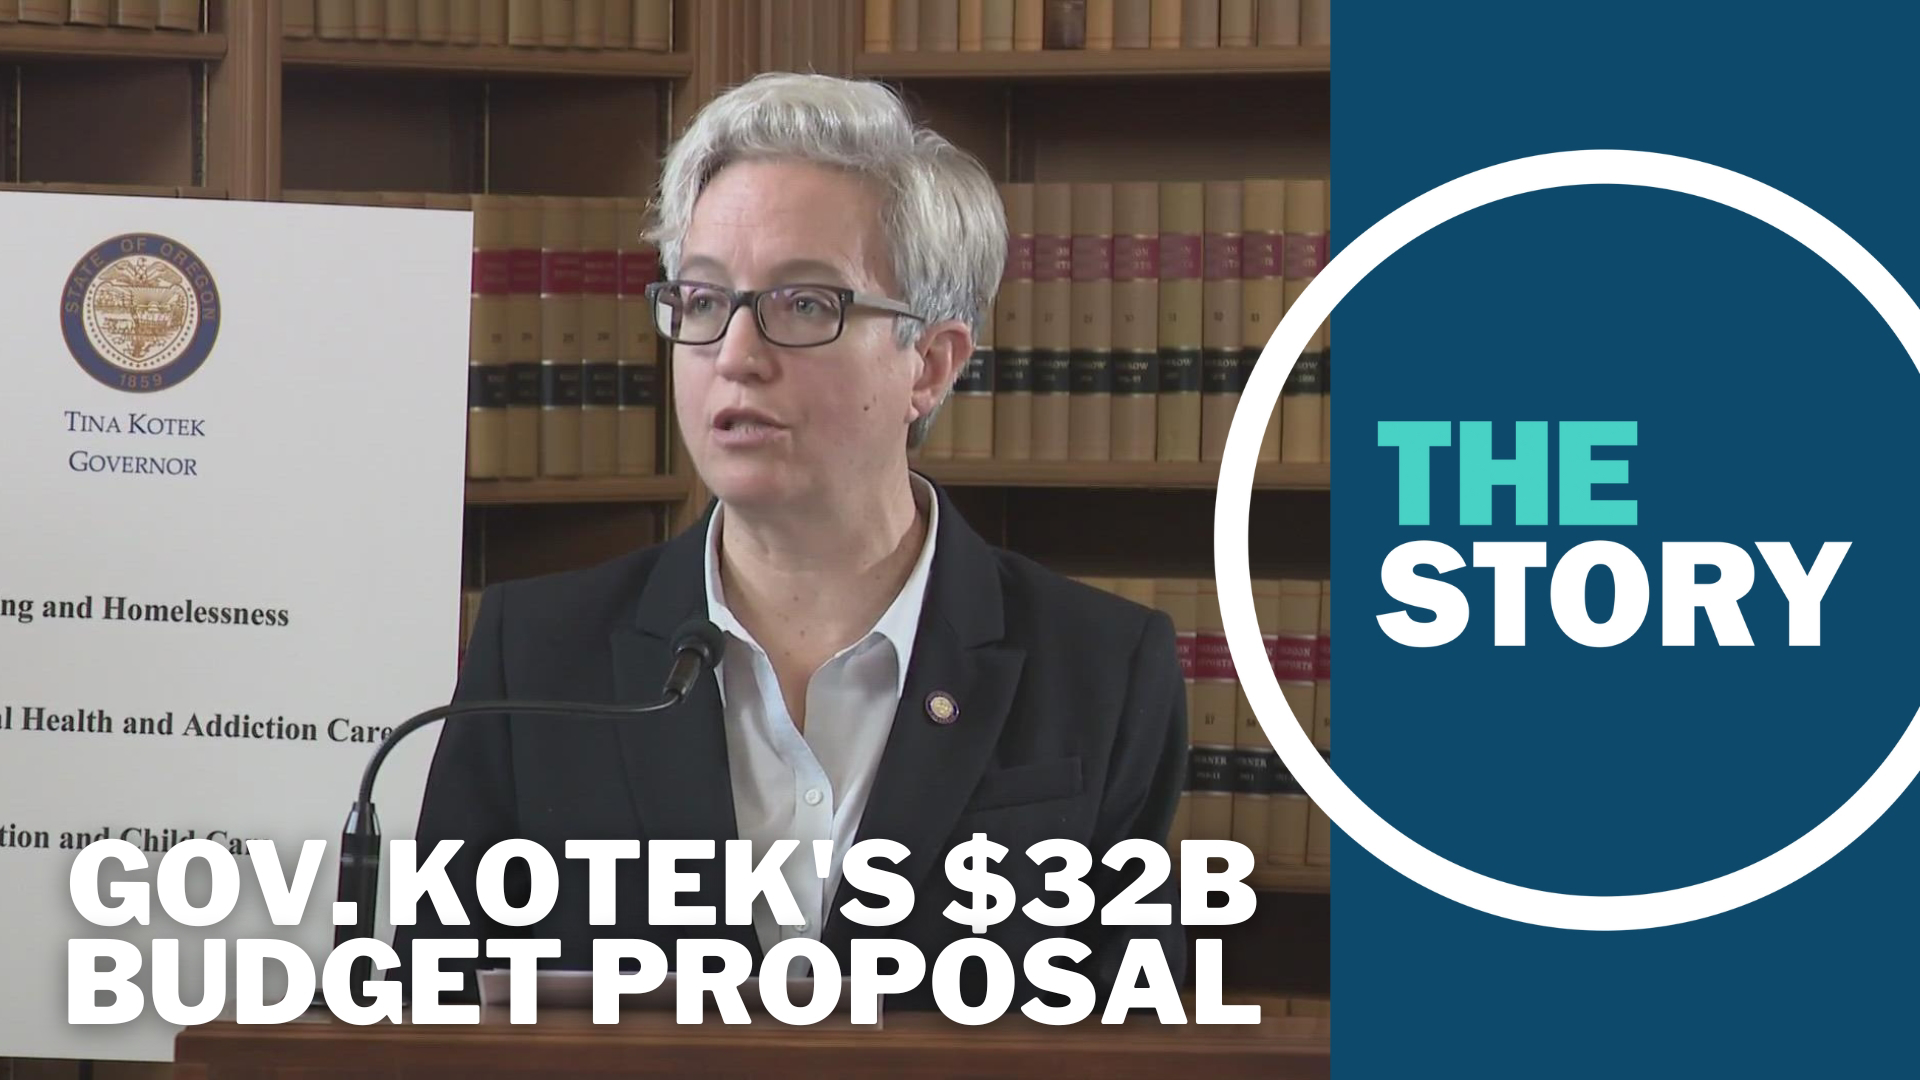 Kotek identified her three main priorities as education, housing and homelessness, and mental health and addiction care.